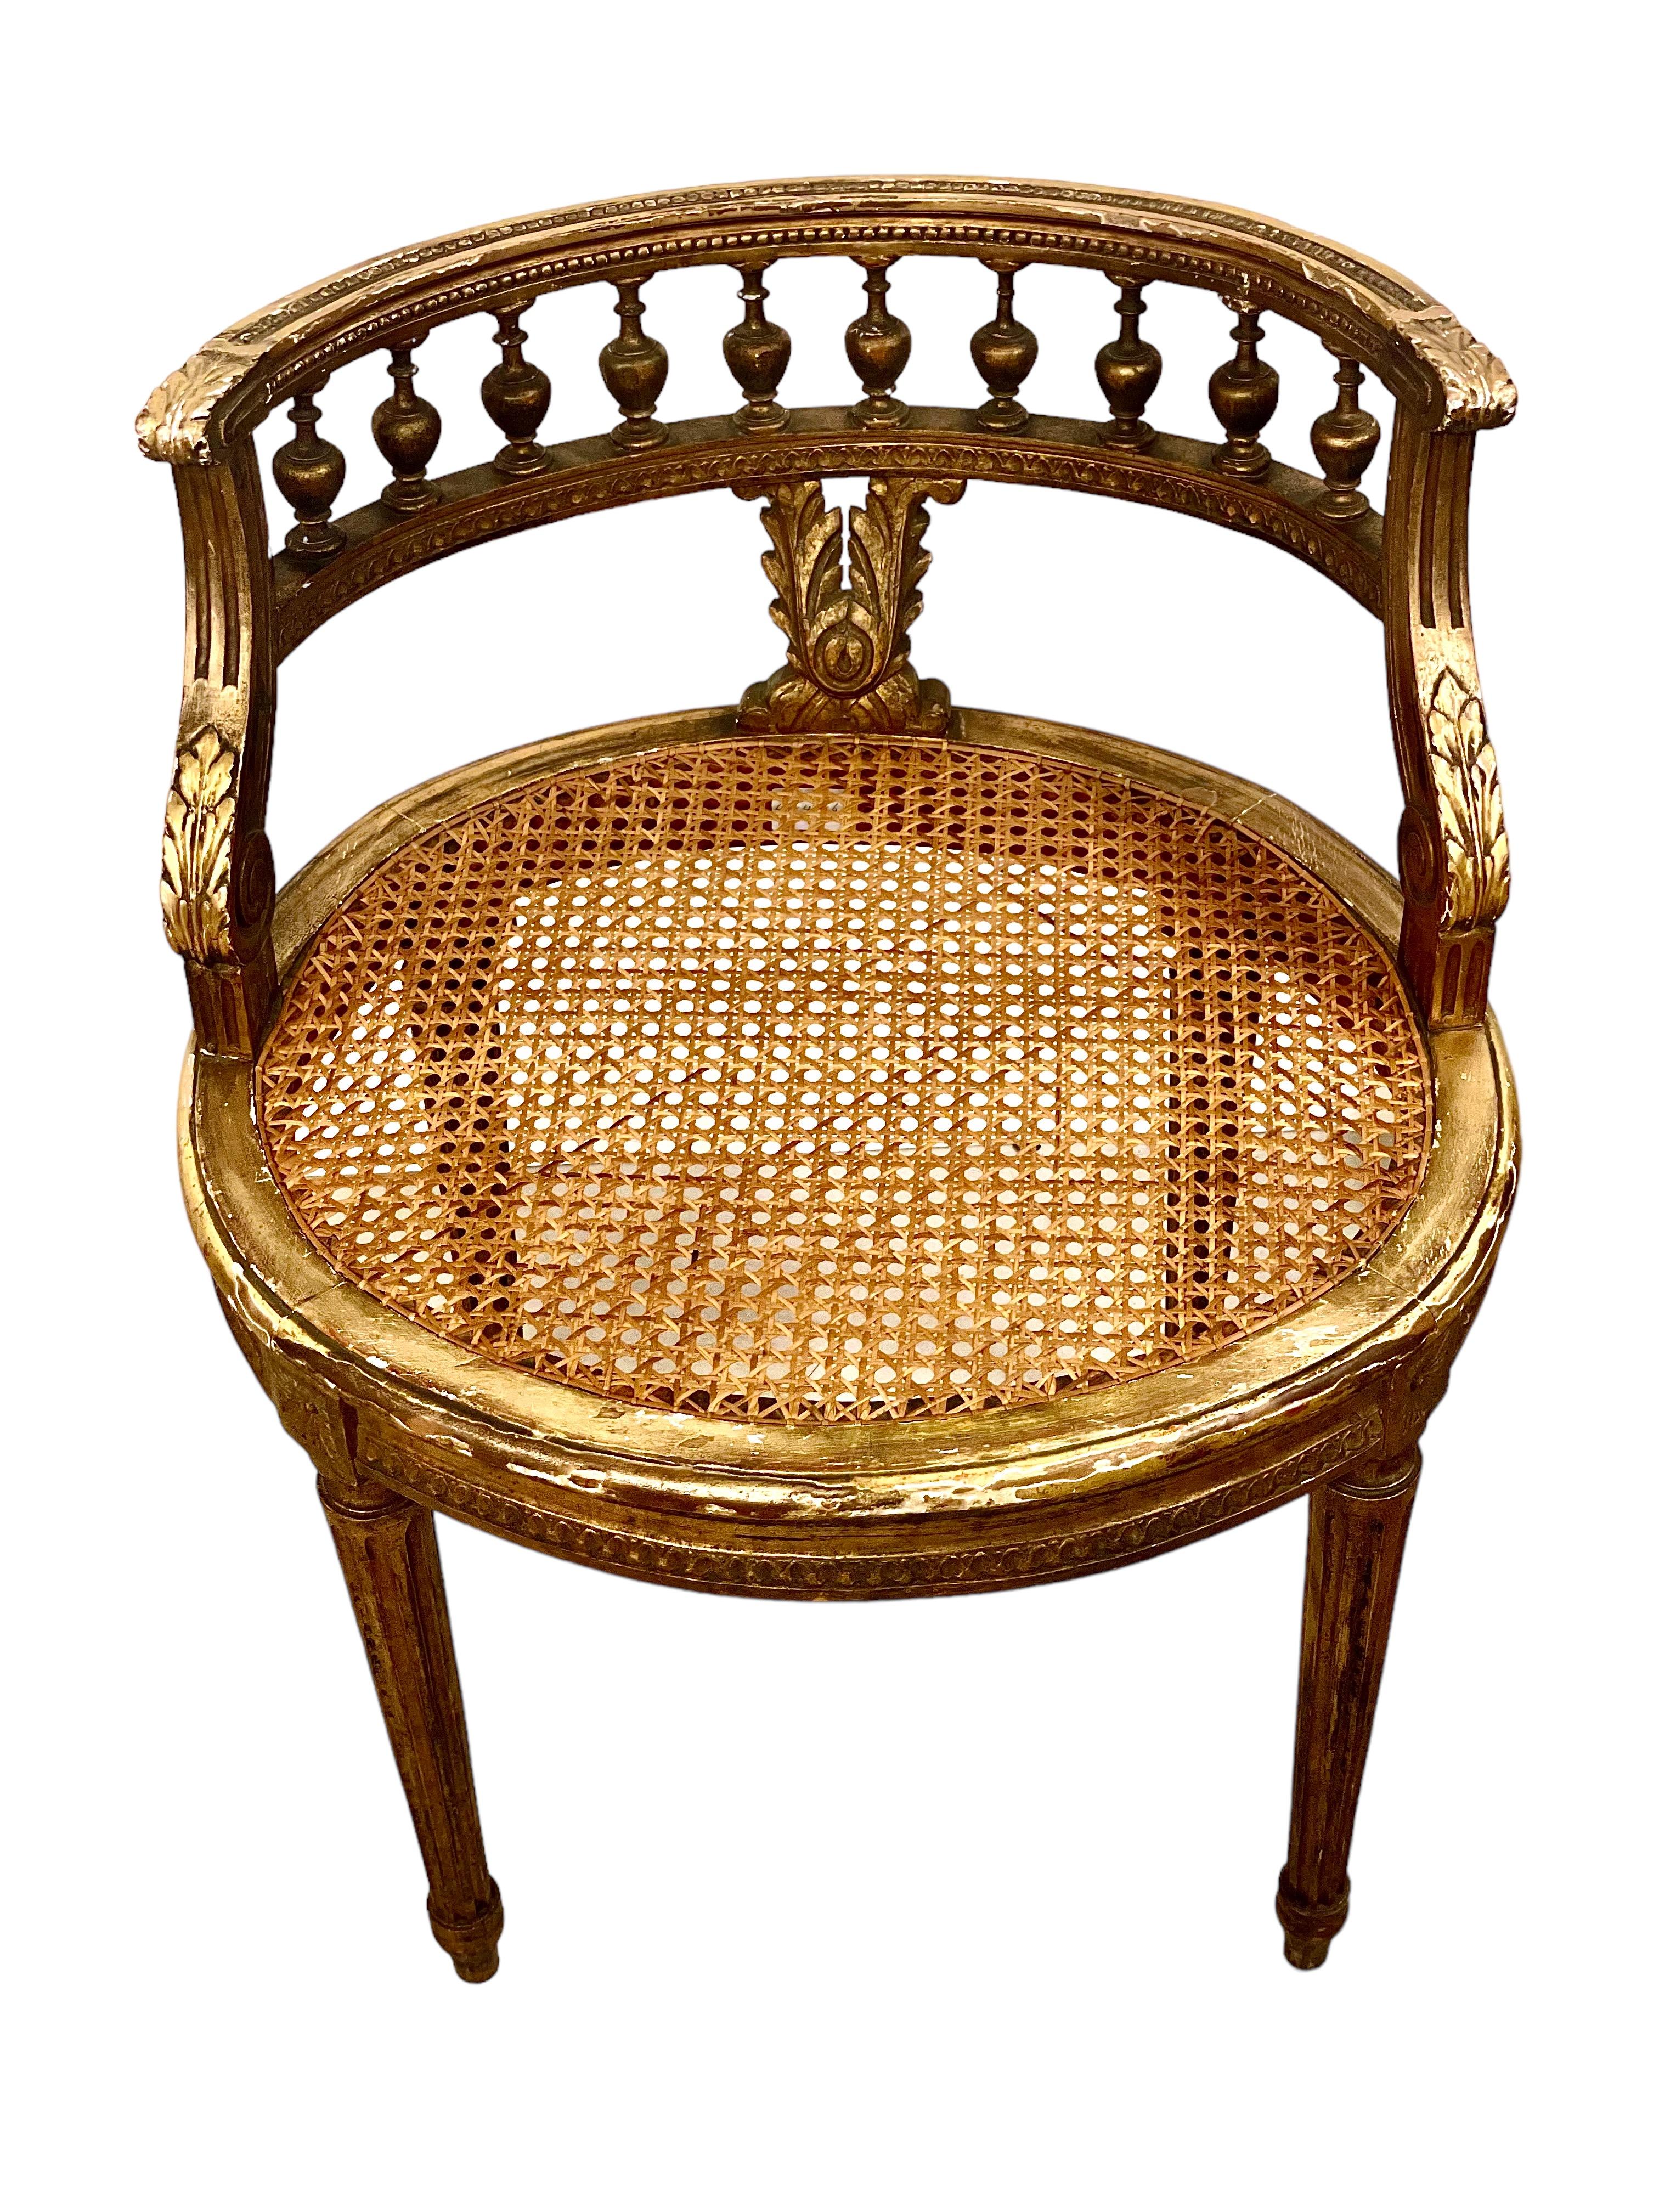 Pair of Antique French Louis XVI Gilt Caned Chairs  For Sale 3